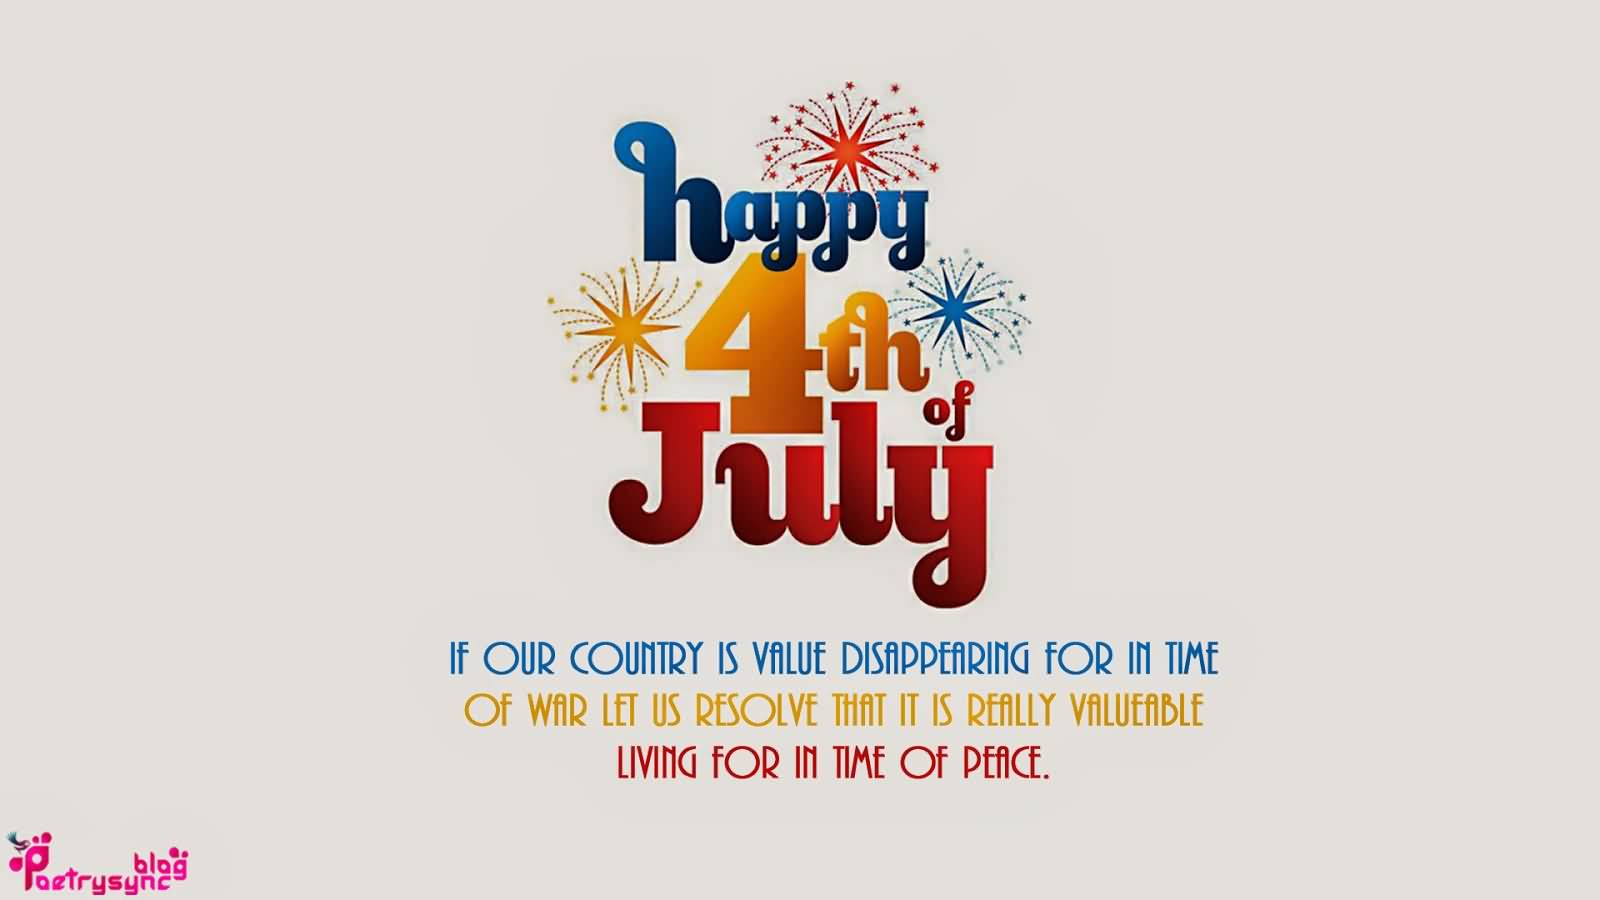 Happy 4th Of July If Our Country Is Value Disappearing For In Time Of War Let Us Resolve That It Is Really Valuable Living For In Time Of Peace.